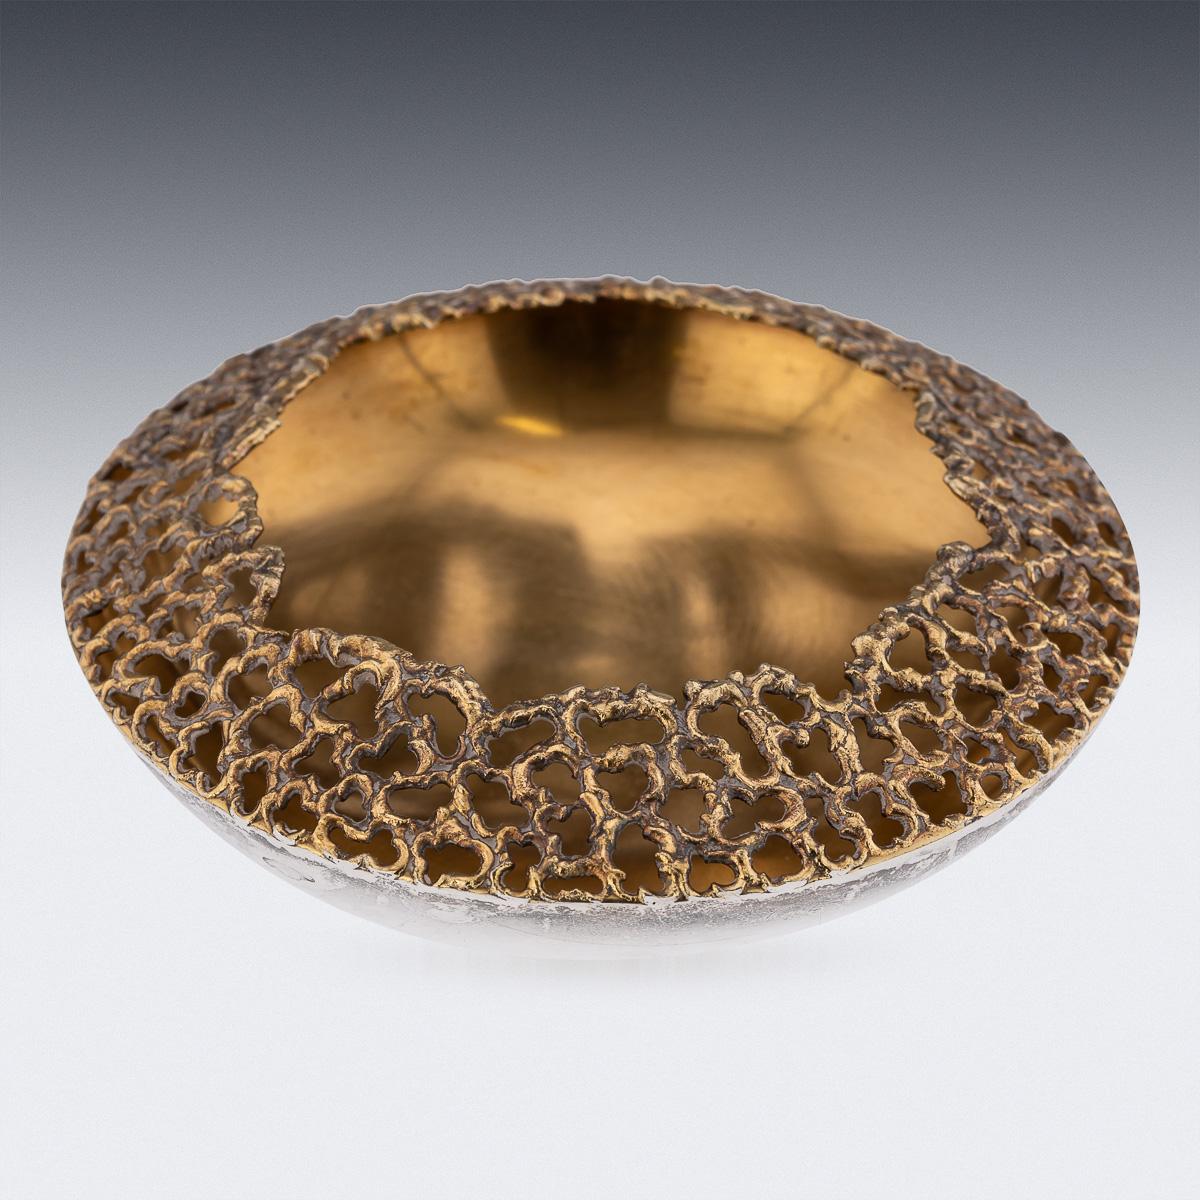 Modern 20th Century Stuart Devlin solid silver gilt cigar ashtray, the textured surface with an organically formed border, the plain bowl resting on a circular foot. Hallmarked English Silver (925 Standard), London, year 1972 (r), Maker's mark S.D